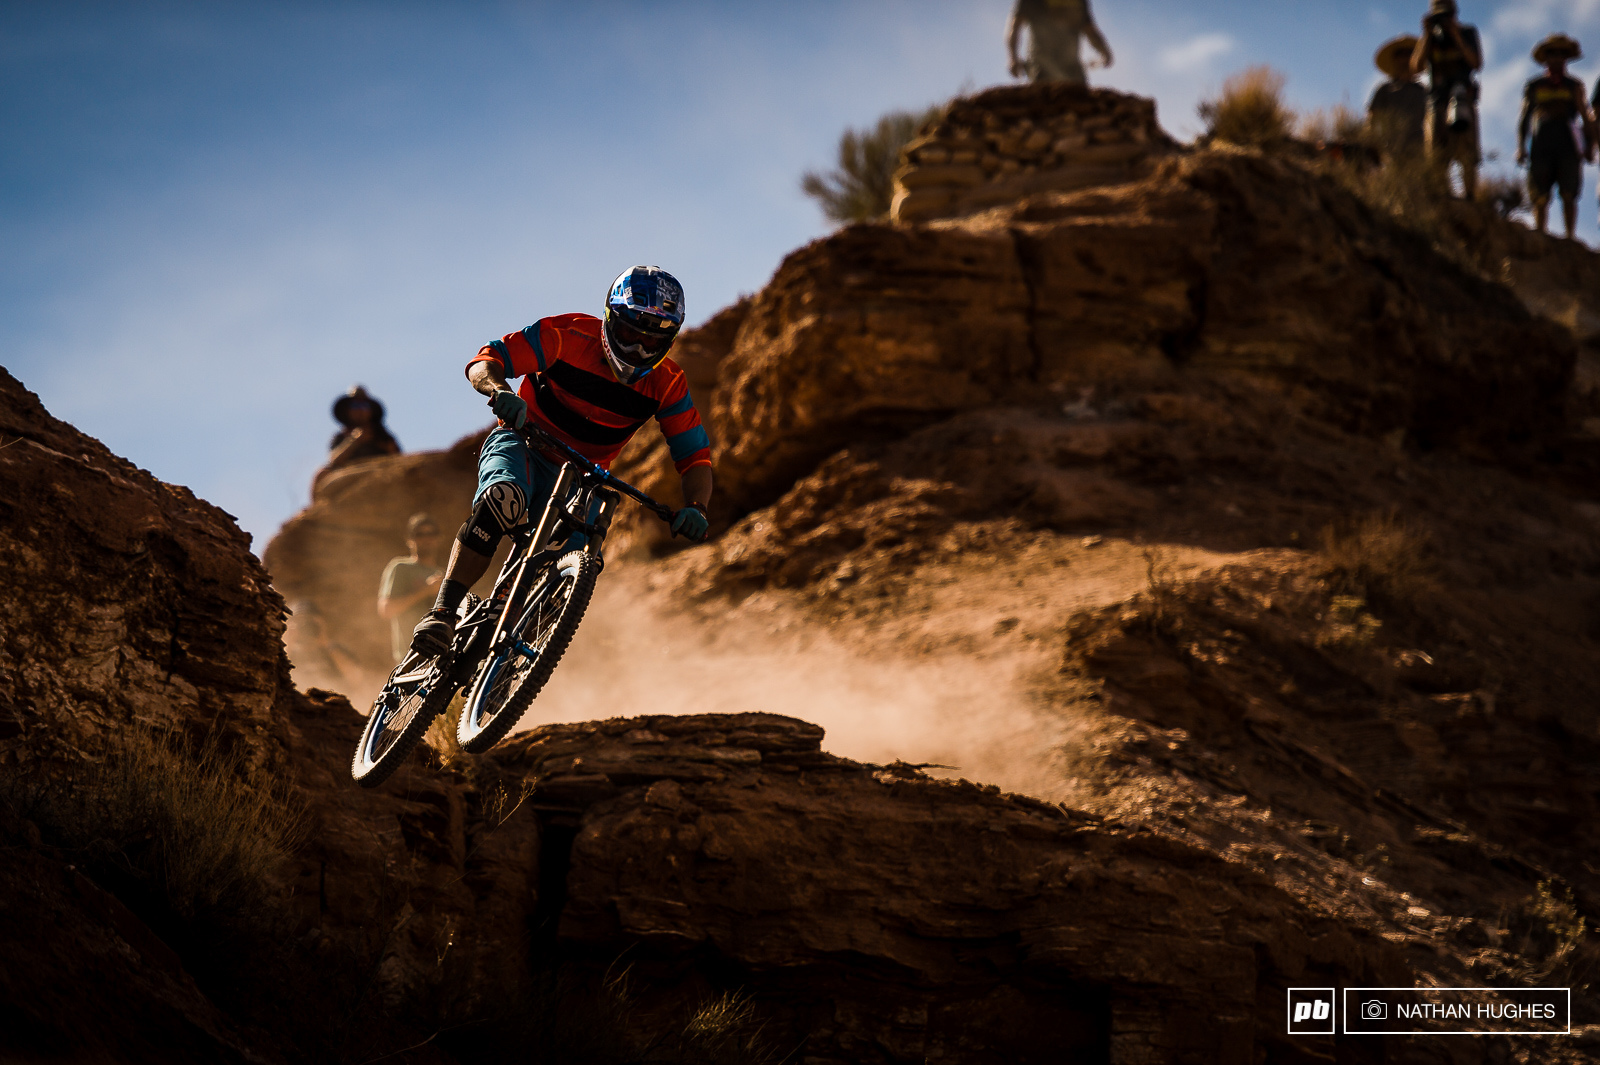 The Canadian legend clawed his way back to another top 10 Rampage performance on his new ride.